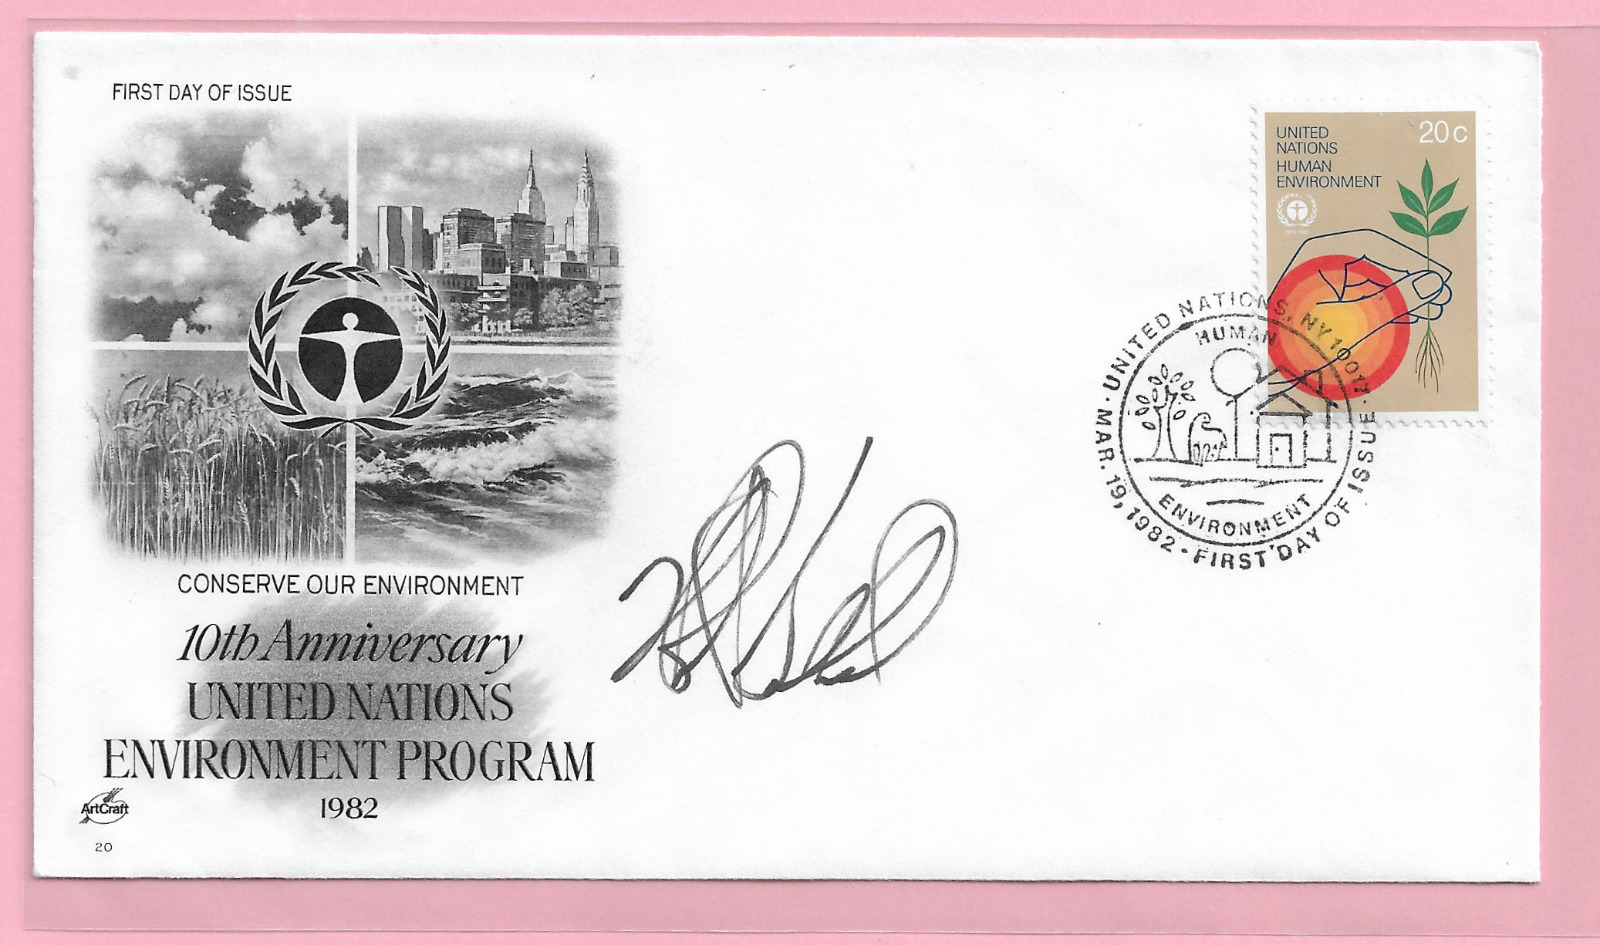 Robert Ballard Signed Autographed First Day Cover, Conserve Our Environment 1982